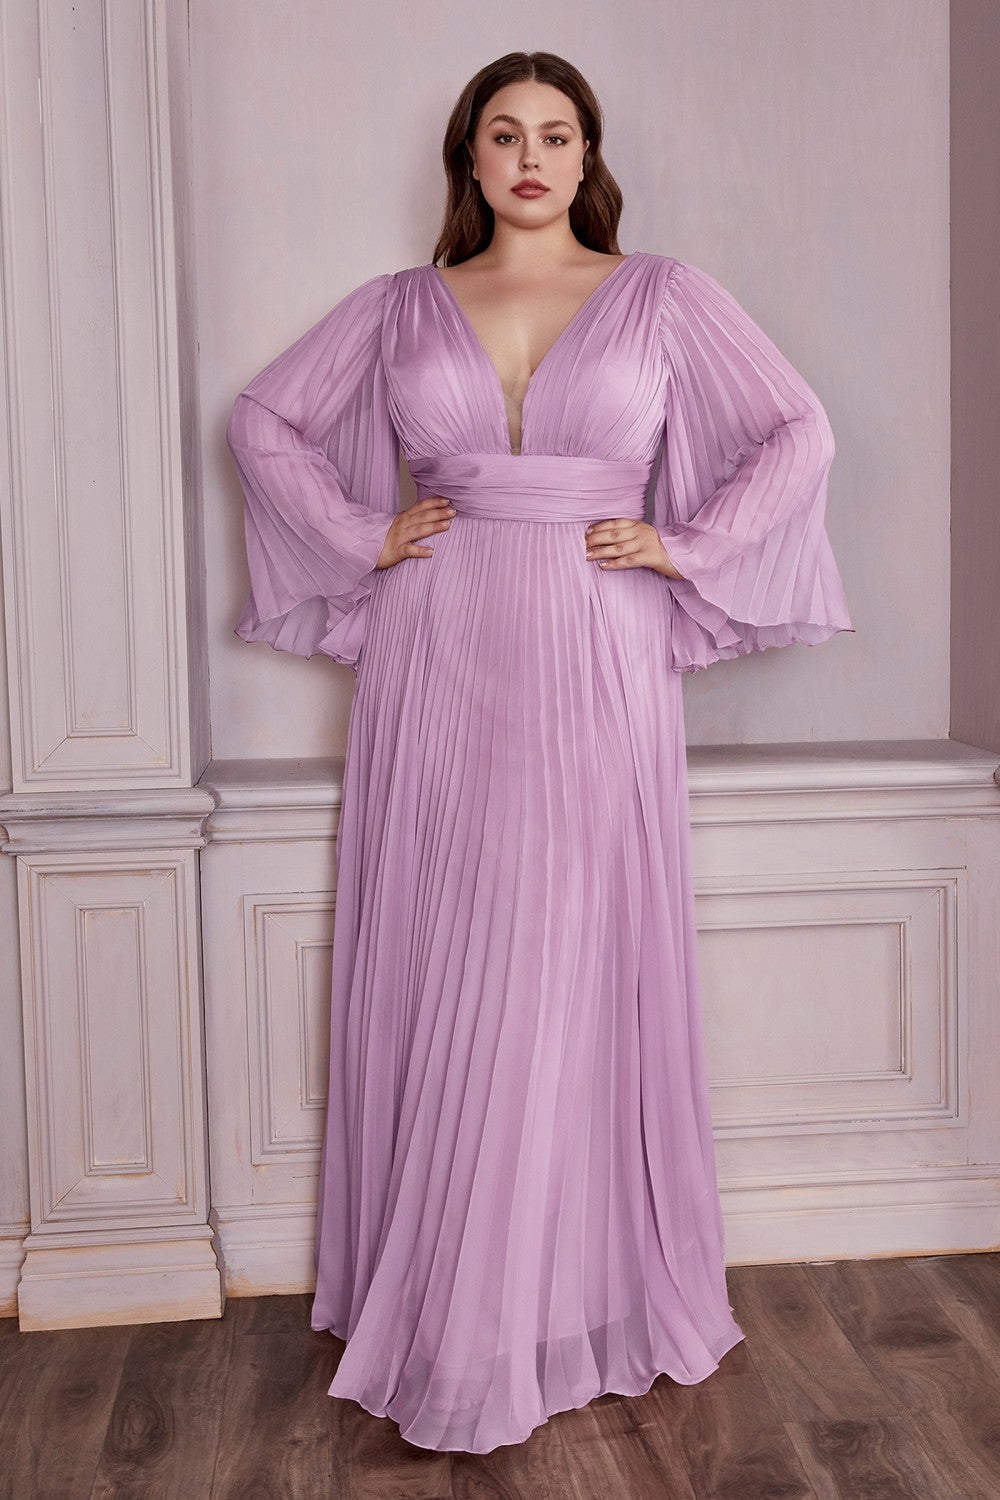 Long Sleeve Illusion V-neck Bodice Plus Size Chiffon Pleated Prom Gown Curvy Solid Bridesmaid Dress A-line Silhouette Skirt CDCD242C Sale Elsy Style Bridesmaid Dress